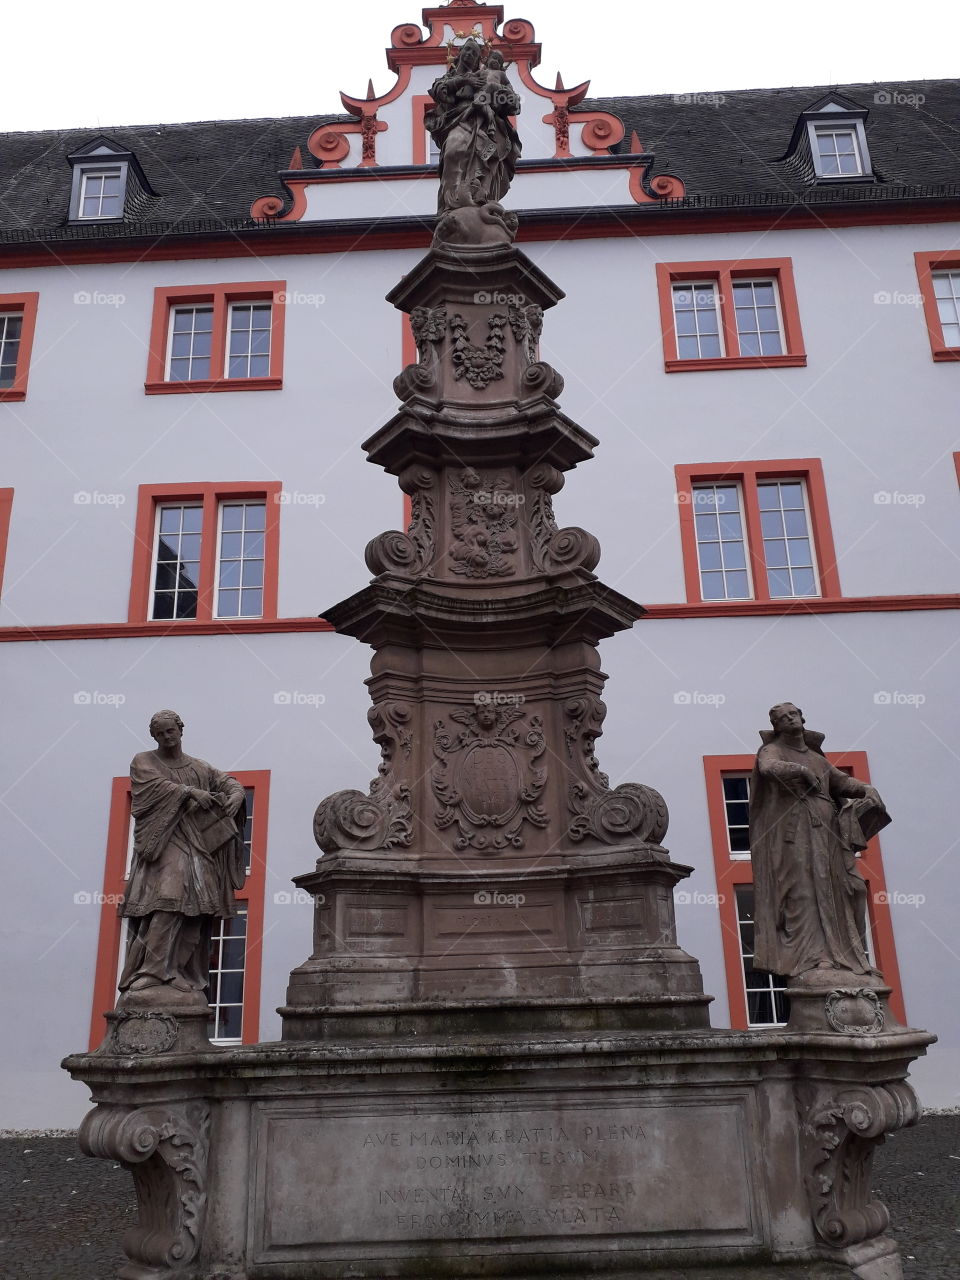 Another statue in trier